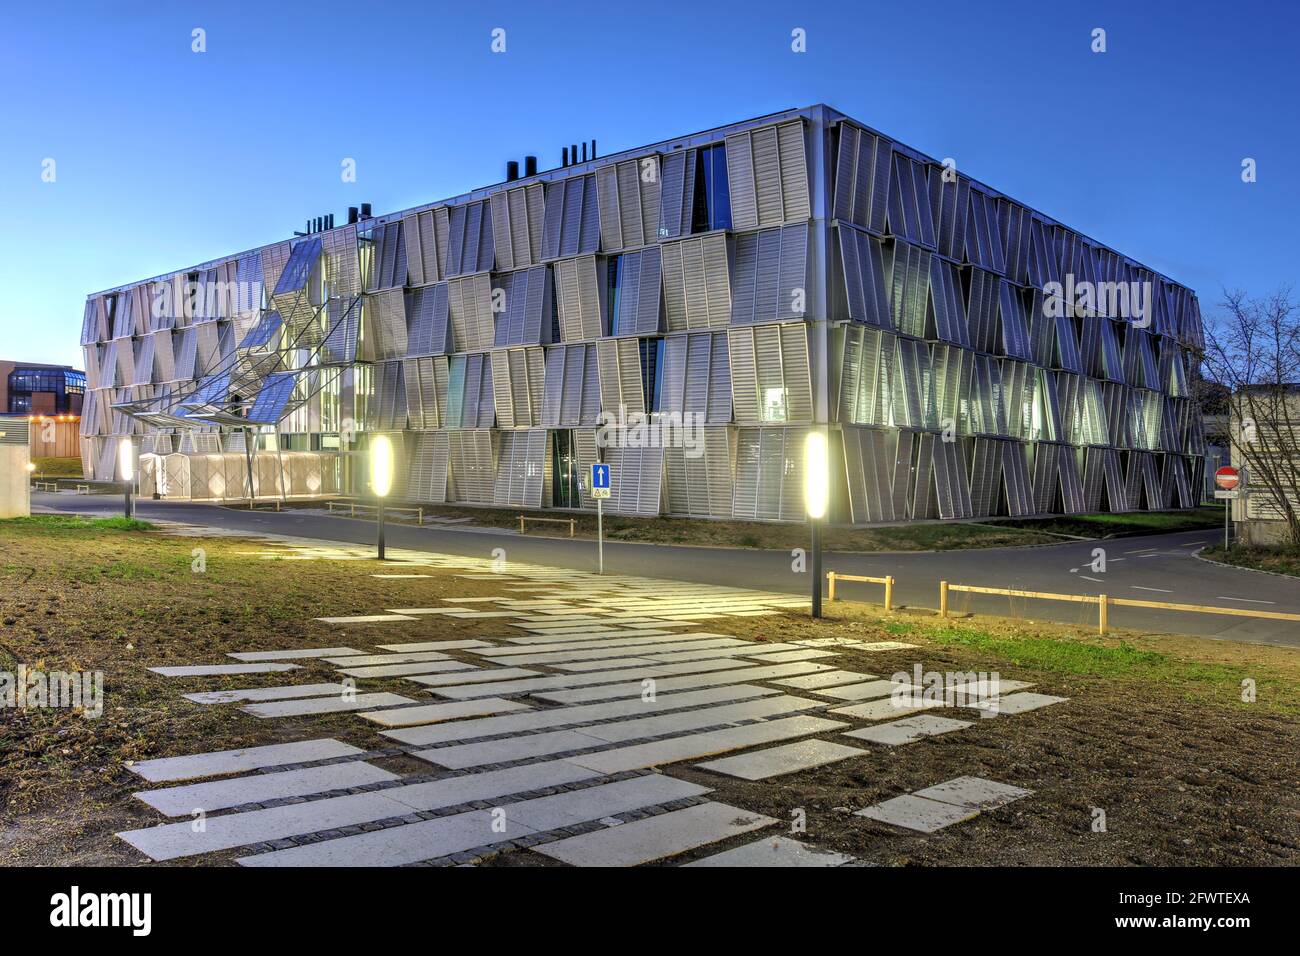 Lausanne, Switzerland - January 7, 2021 - Night scene on EPFL campus (Swiss Federal Institute of Technology Lausanne), featuring the new ME (Mechanica Stock Photo